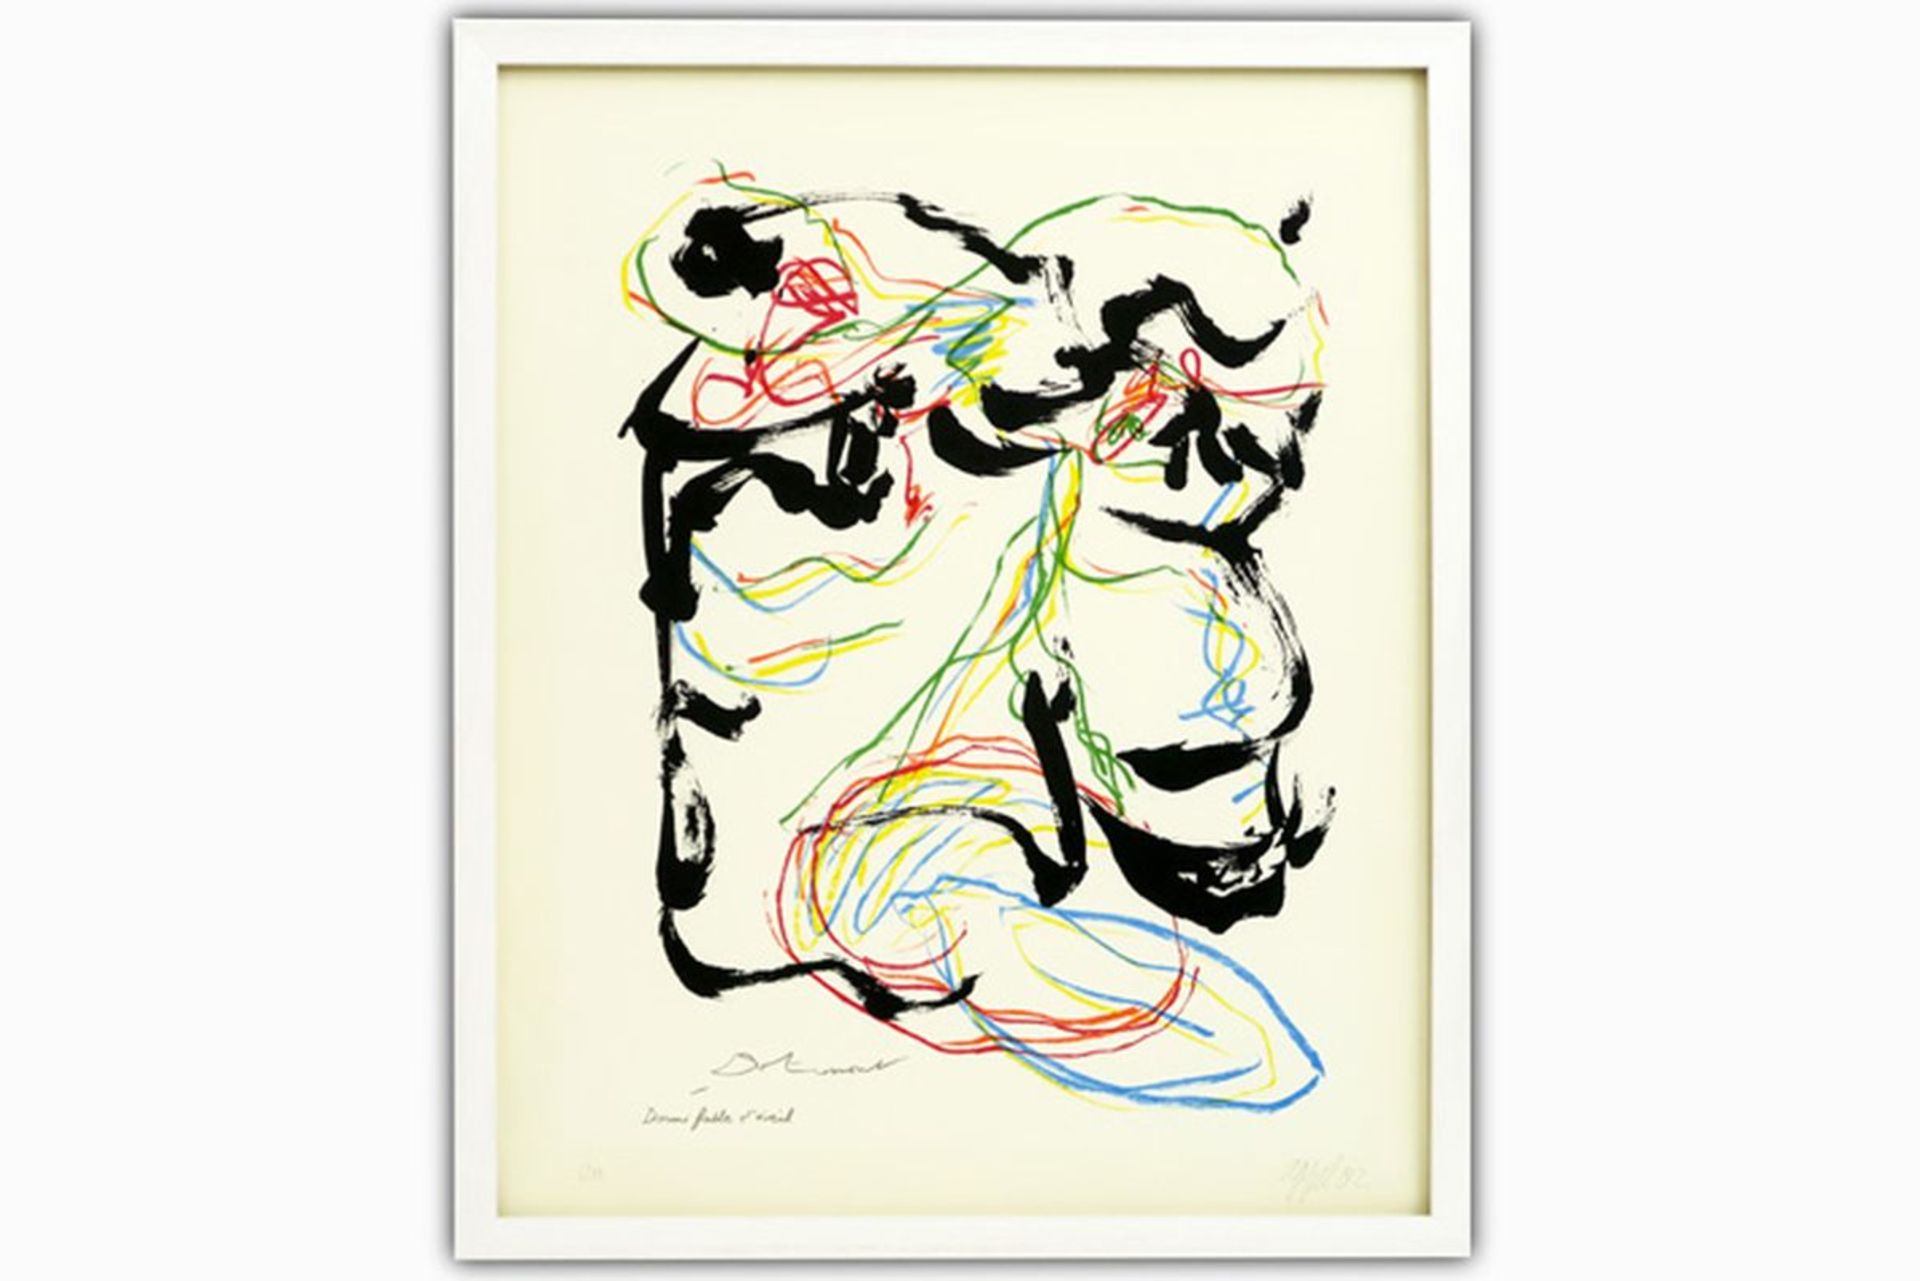 20th Cent. Belgo-Dutch screenprint by Christian Dotremont and Karel Appel , one of [...]